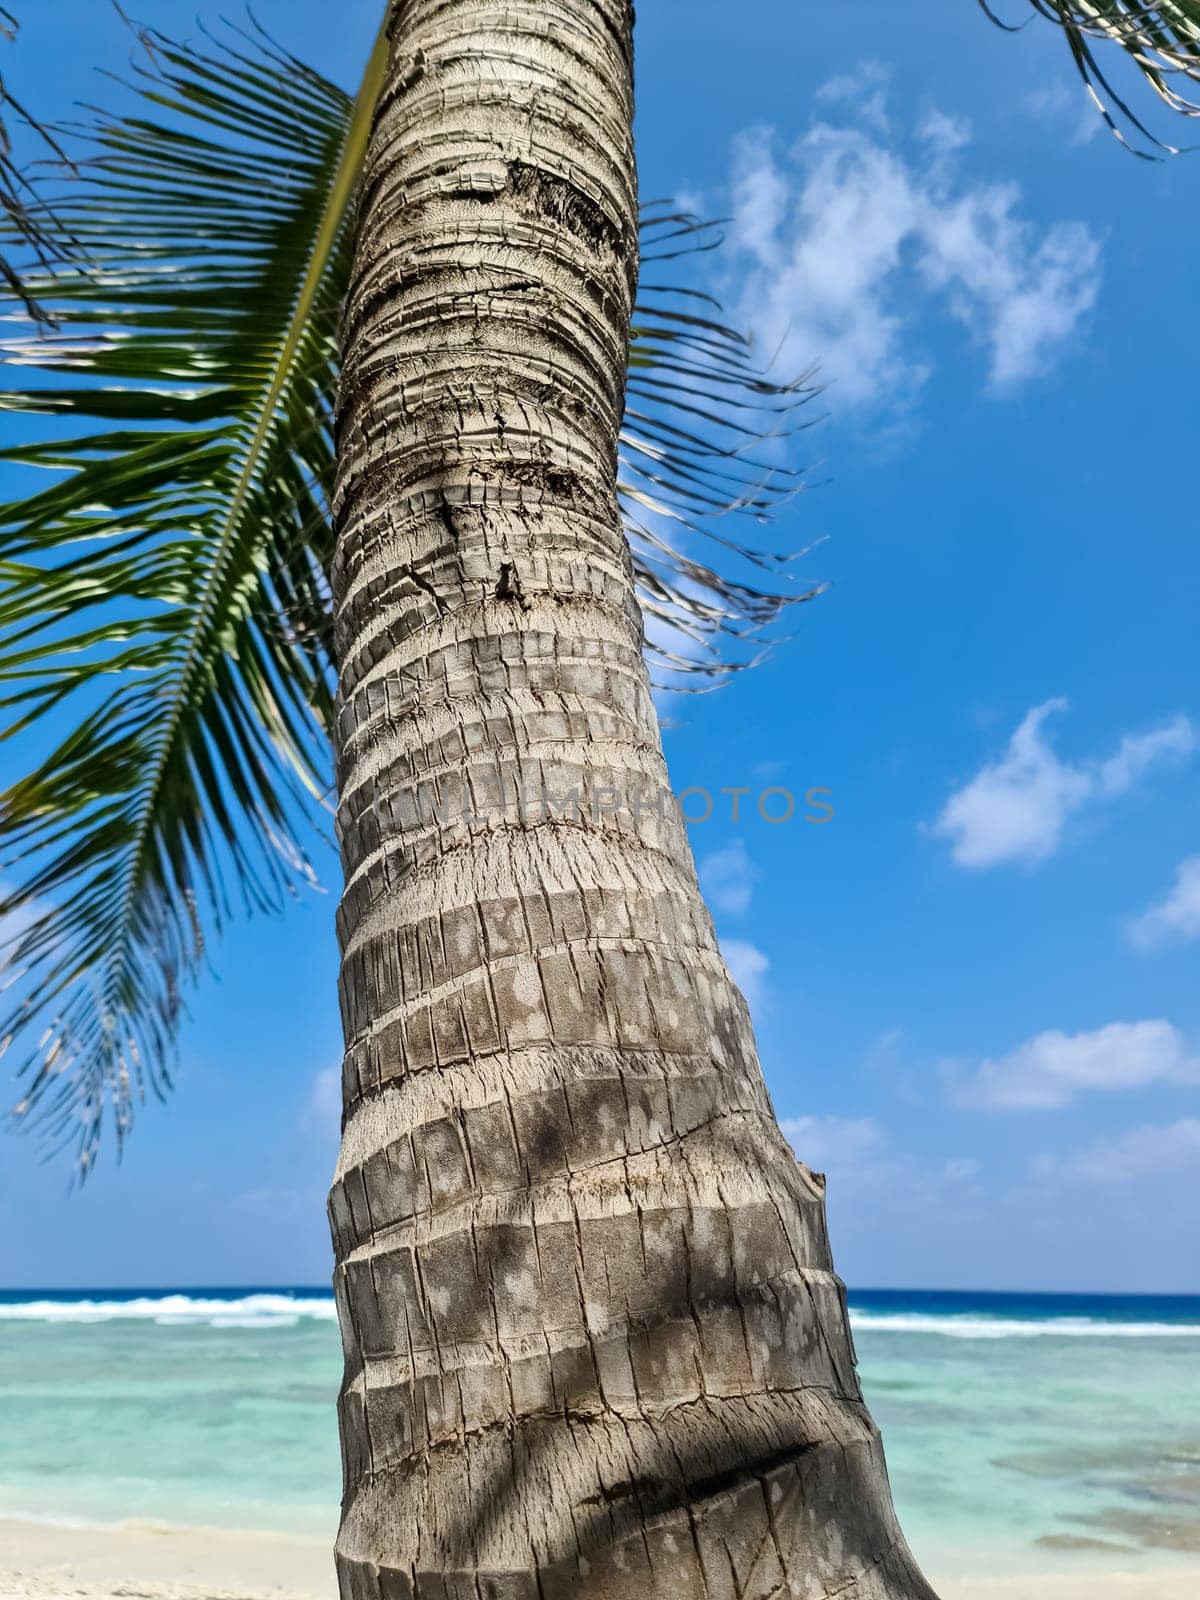 Palm trees on the beautiful beaches of the Indian Ocean in the Maldives. by MP_foto71